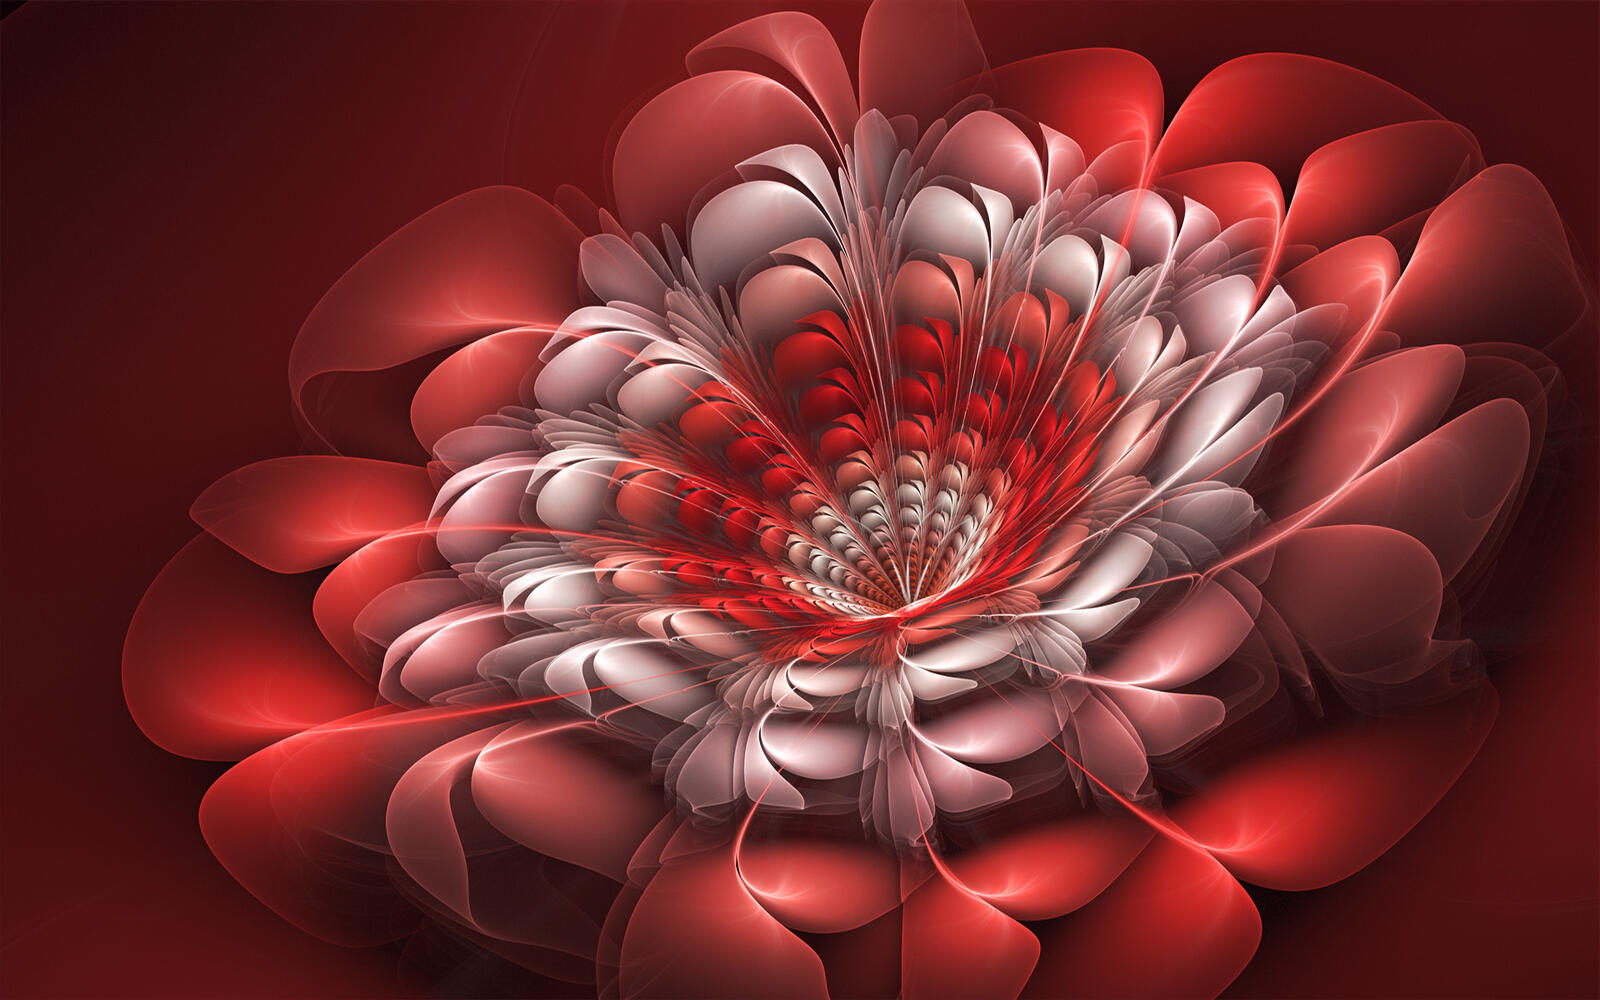 Wallpapers abstraction art flowers on the desktop